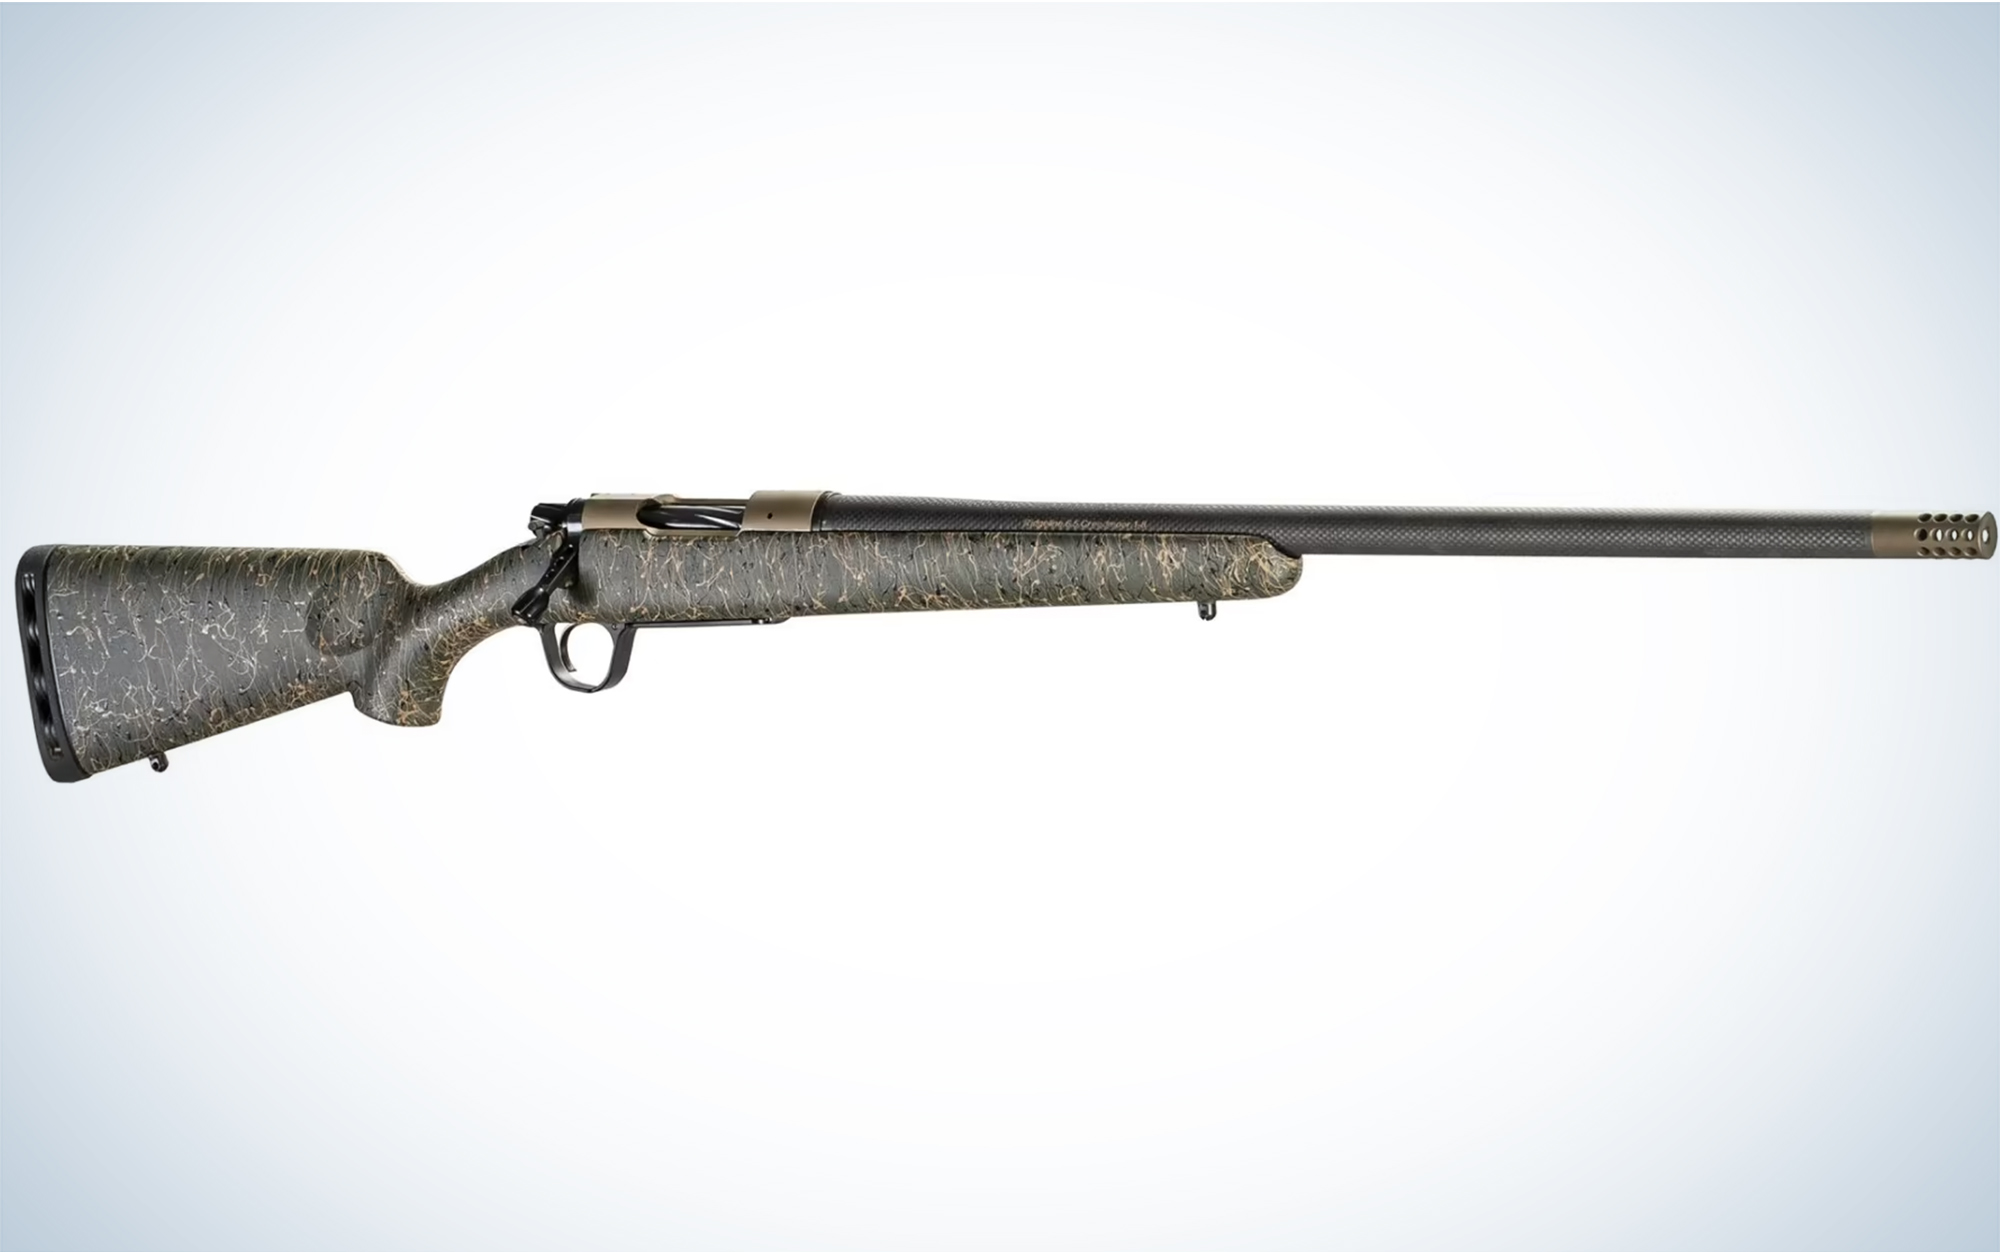 The Christensen Arms Ridgeline is one of the best rifles for mountain hunting.